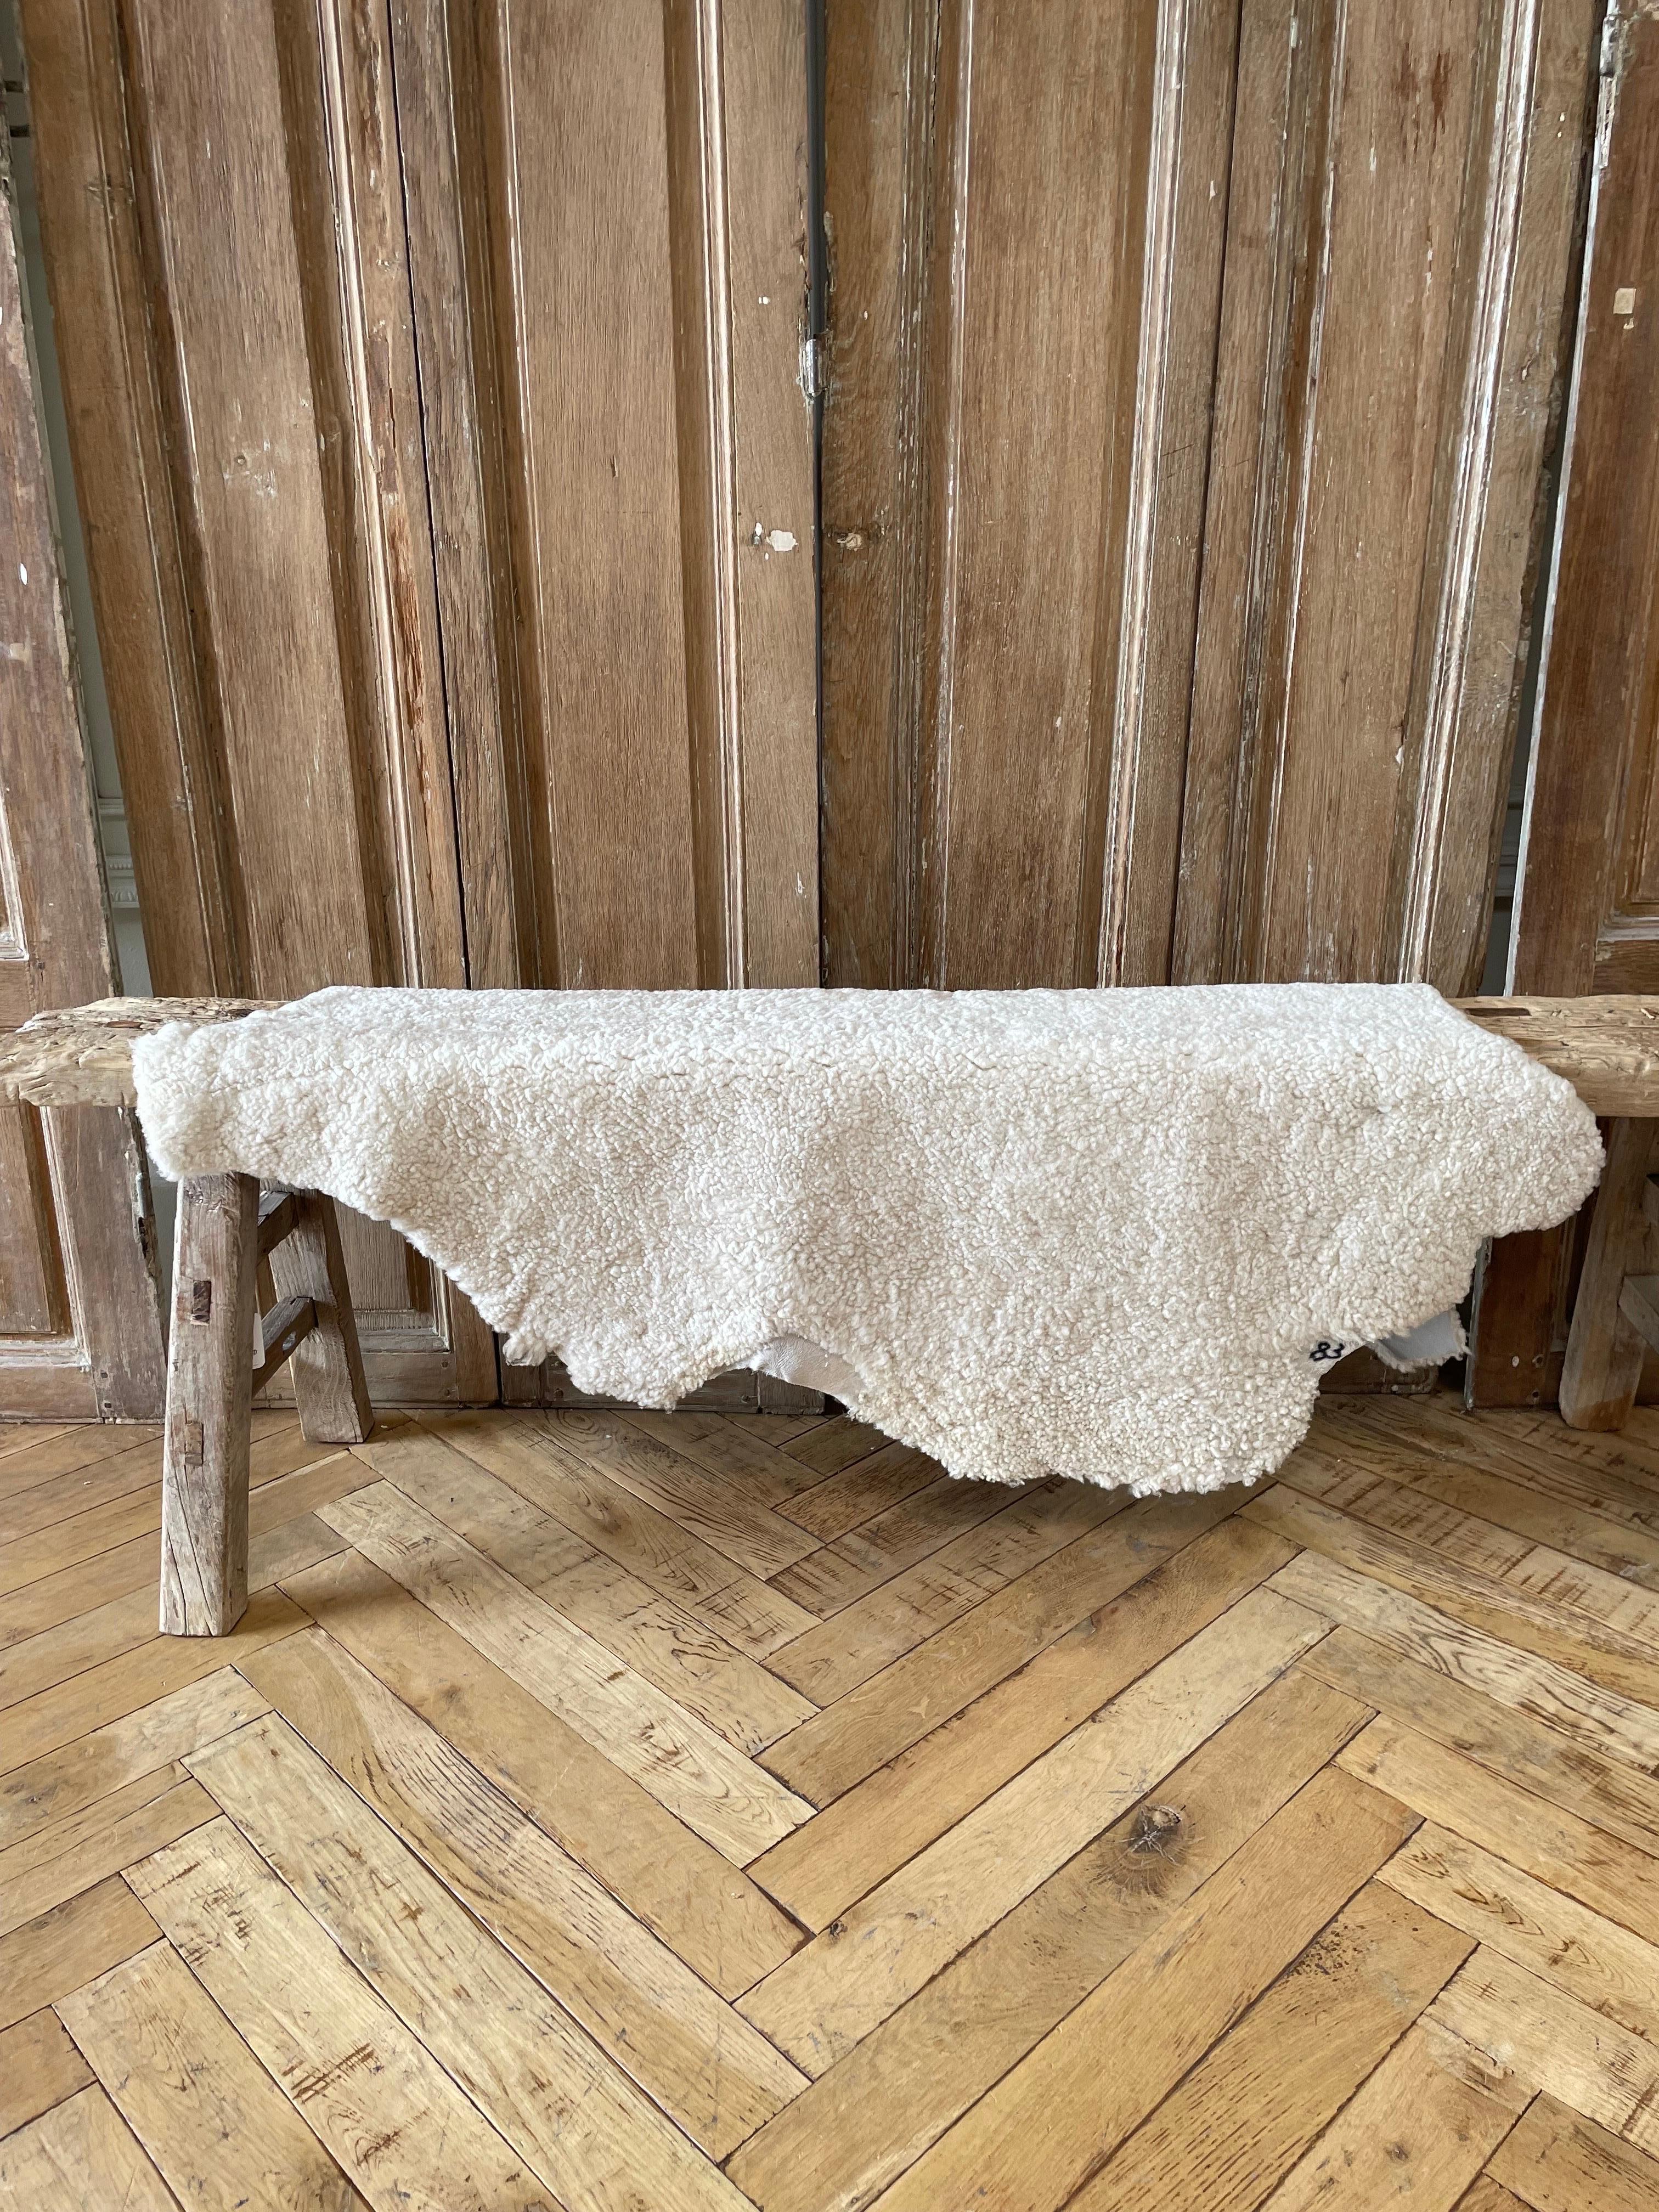 Natural sheepskin hide in white / natural oat color.
Size: 41x34
Multiple quantities available to use for upholstery, or just on its own.
Approx 4.5 usable sq ft.